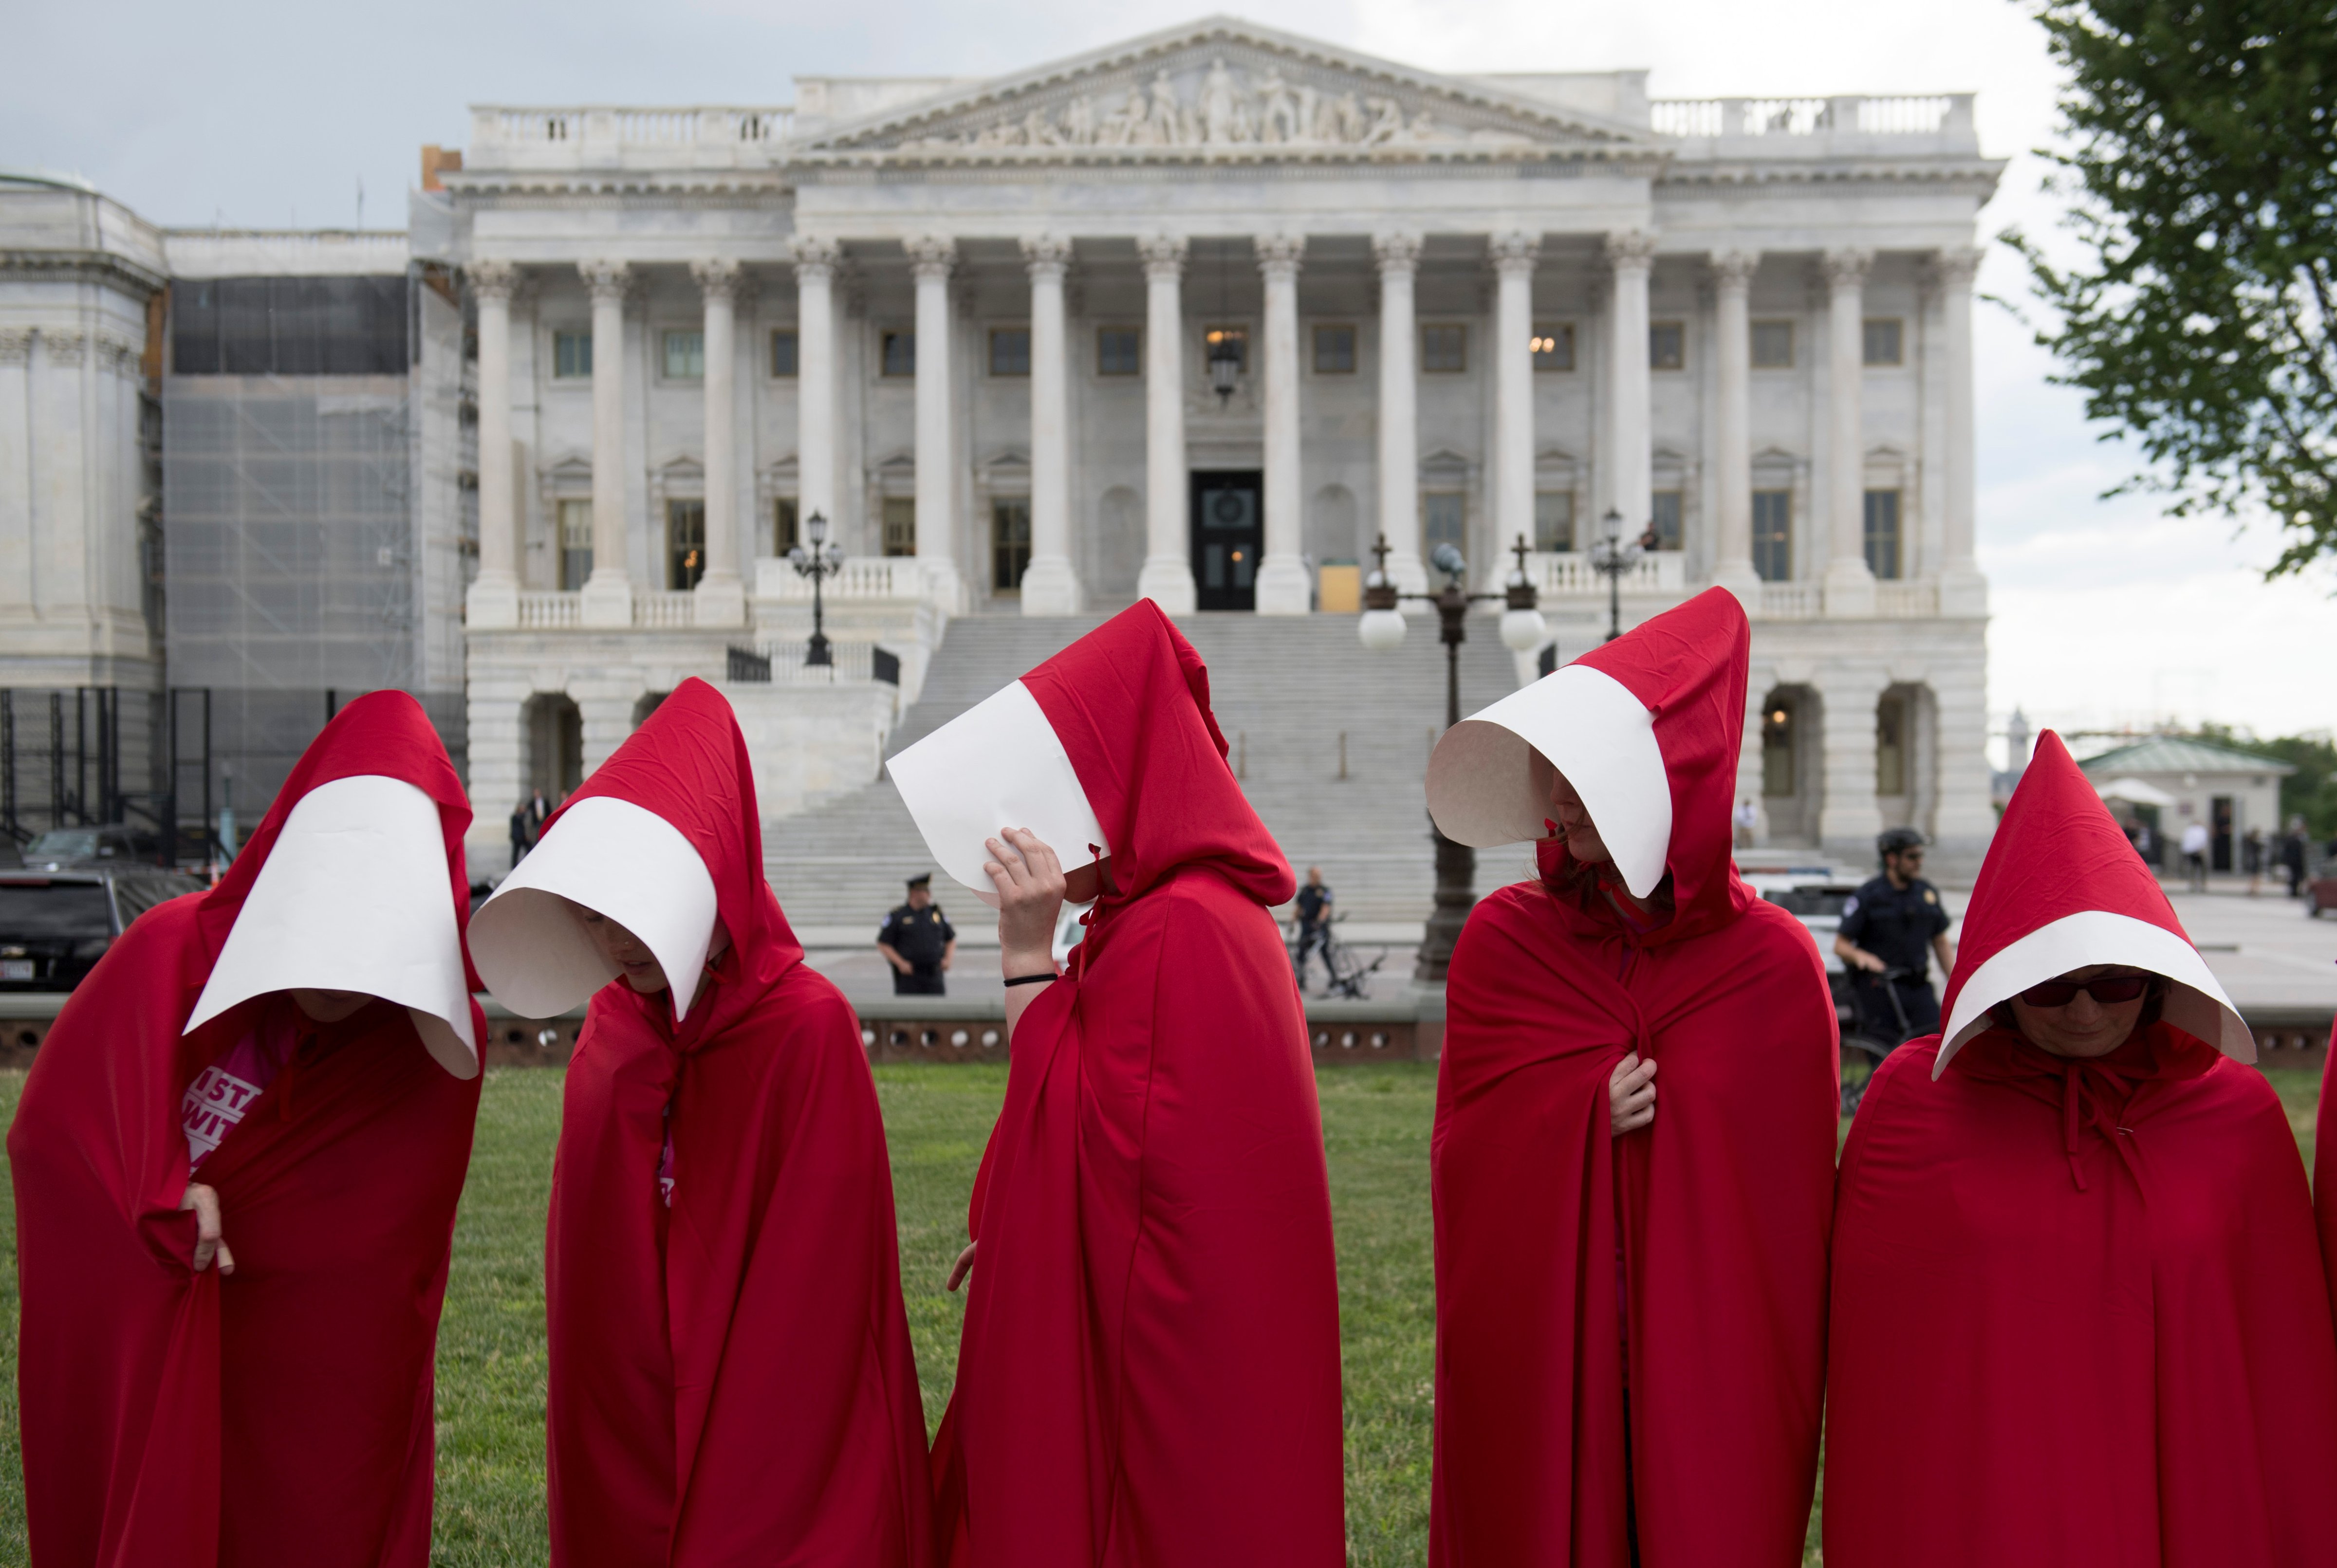 Supporters of Planned Parenthood dressed as characters from "The Handmaid's Tale," hold a rally as they protest the US Senate Republicans' healthcare bill outside the US Capitol in Washington, DC, June 27, 2017. / AFP PHOTO / SAUL LOEB        (Photo credit should read SAUL LOEB/AFP/Getty Images) (SAUL LOEB&mdash;AFP/Getty Images)